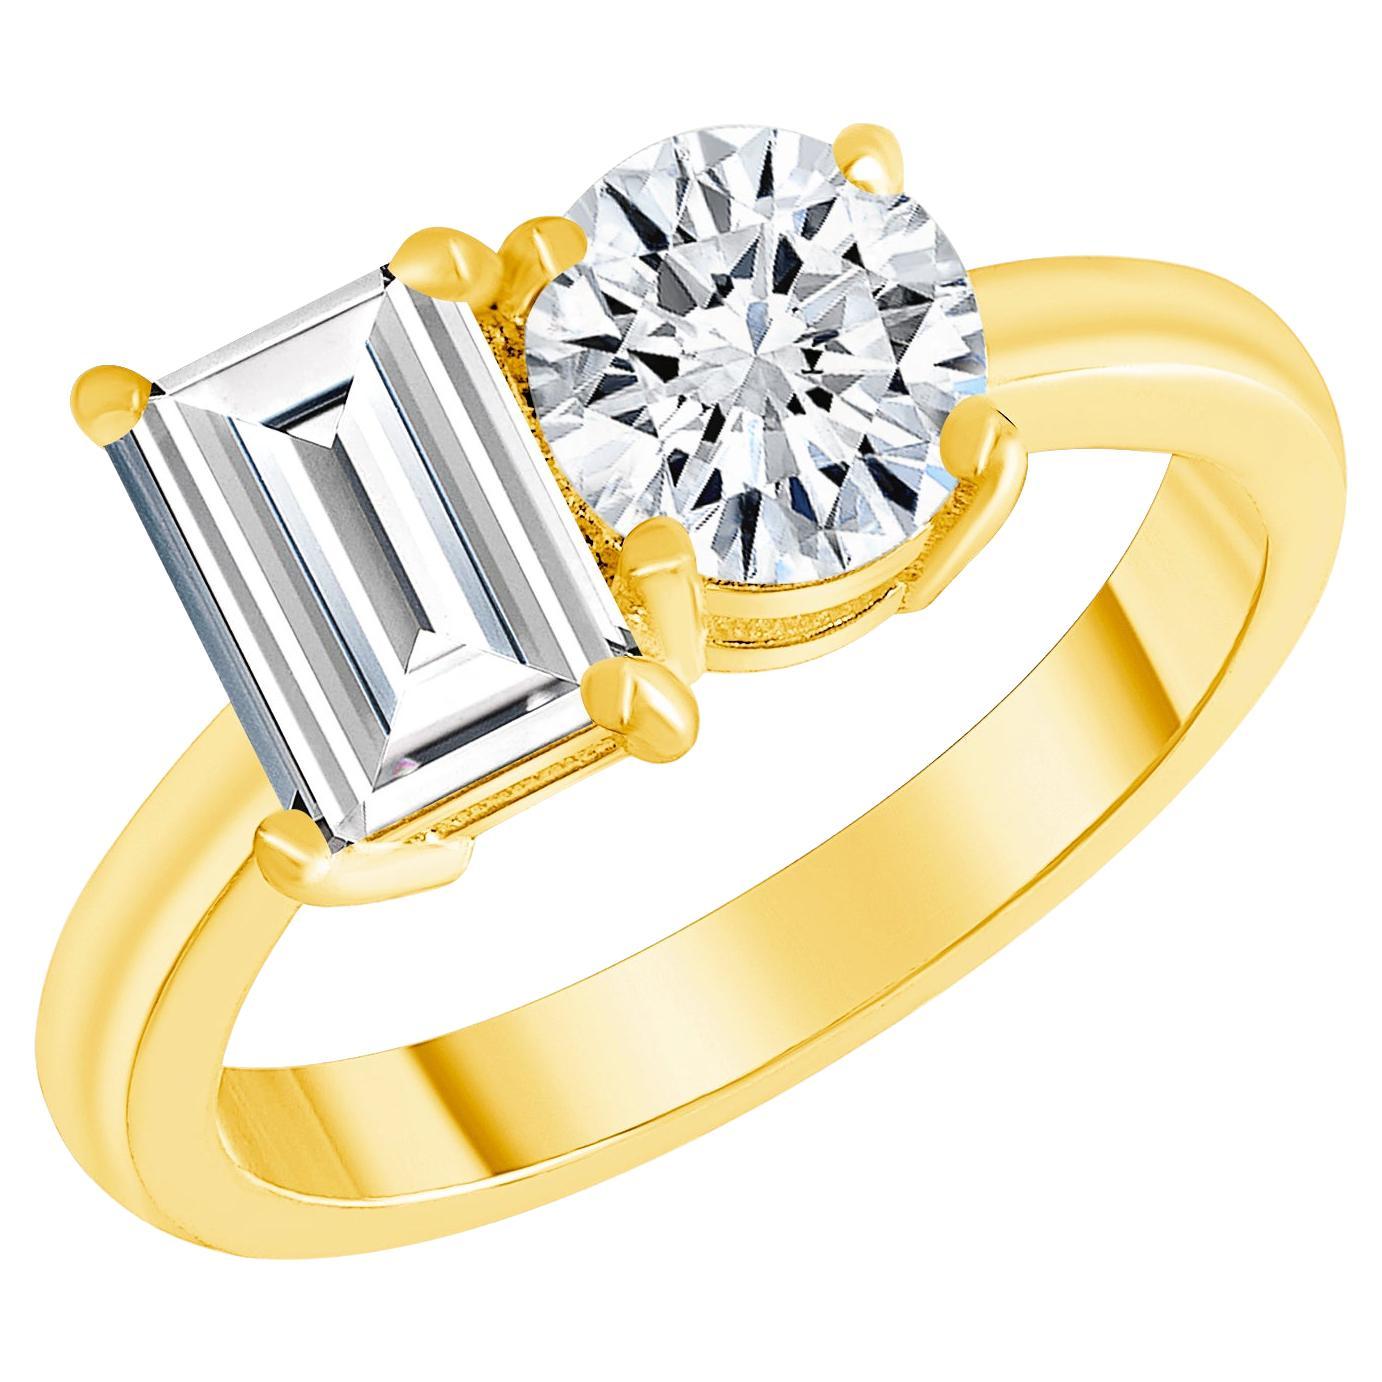 Toi et Moi Emerald Cut and Round Diamond Two Stone Engagement Ring 1.00 Carat